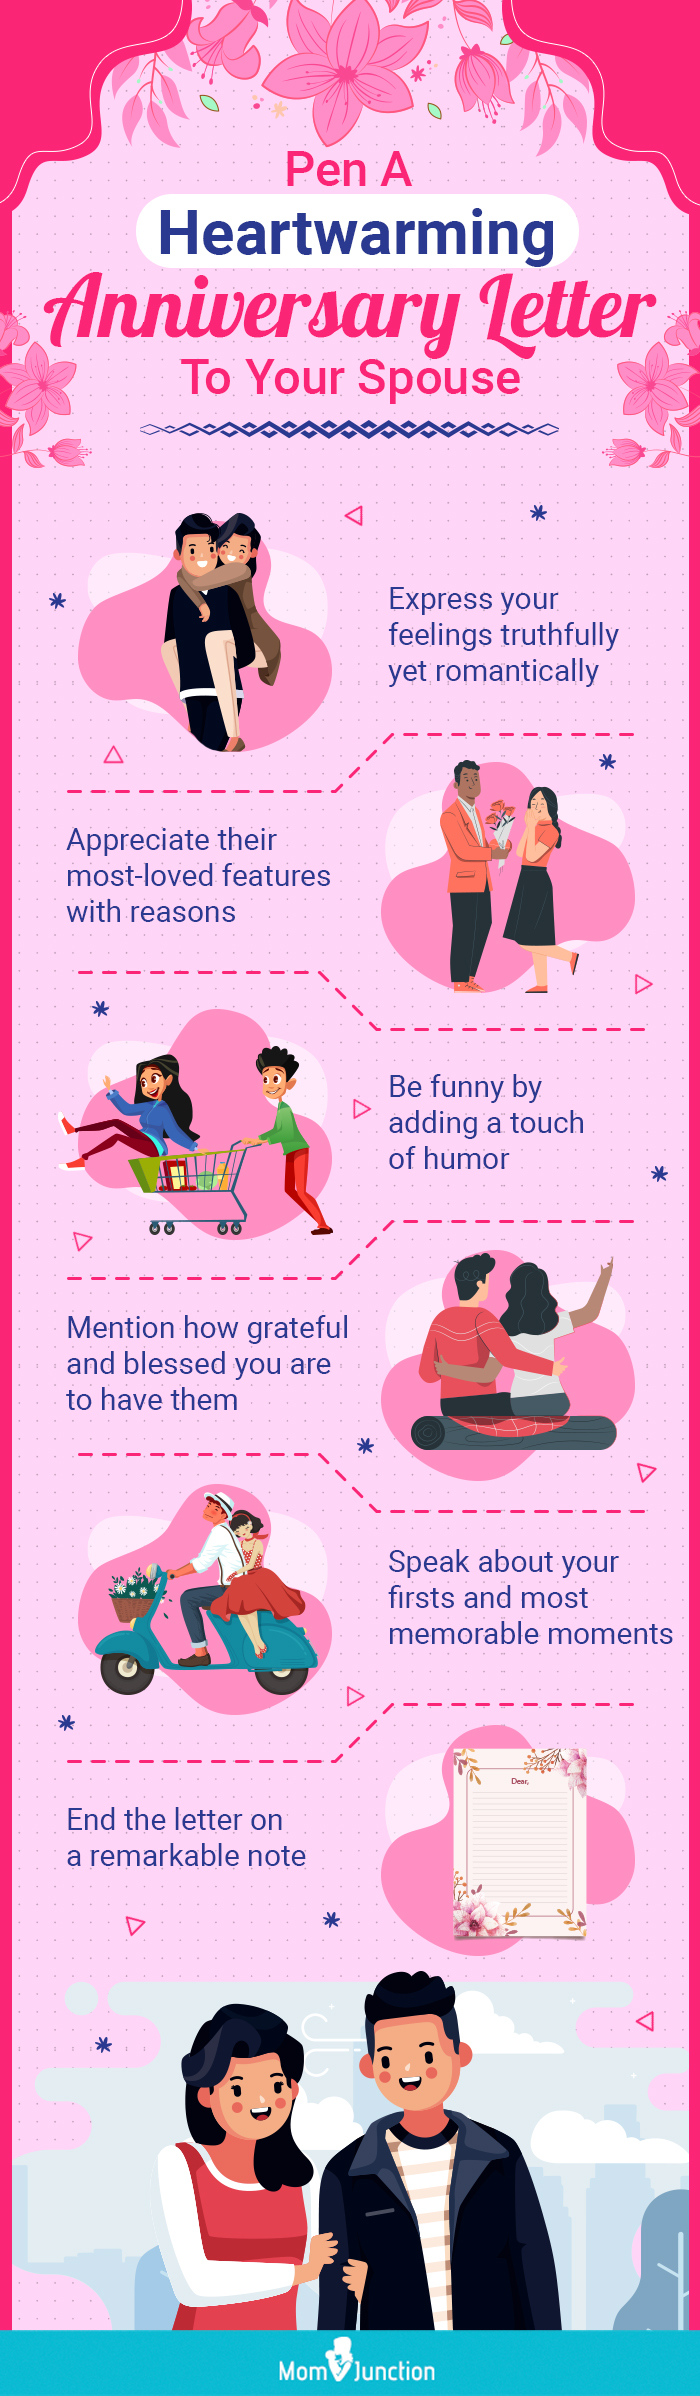 pen a heartwarming anniversary letter to your spouse [infographic]